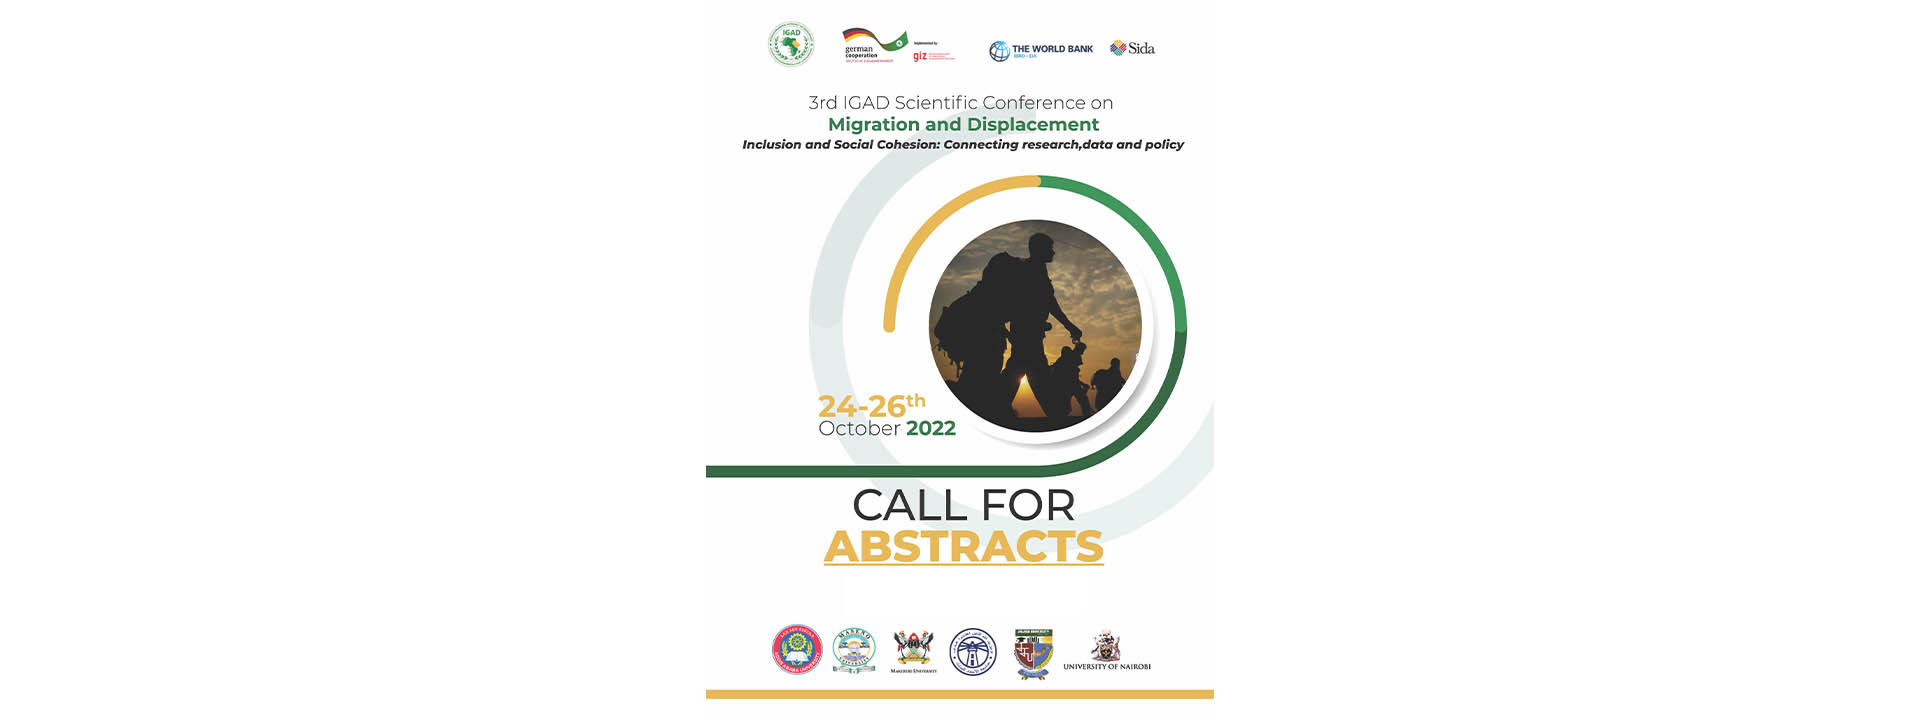 3rd IGAD Scientific Conference – Call For Abstracts